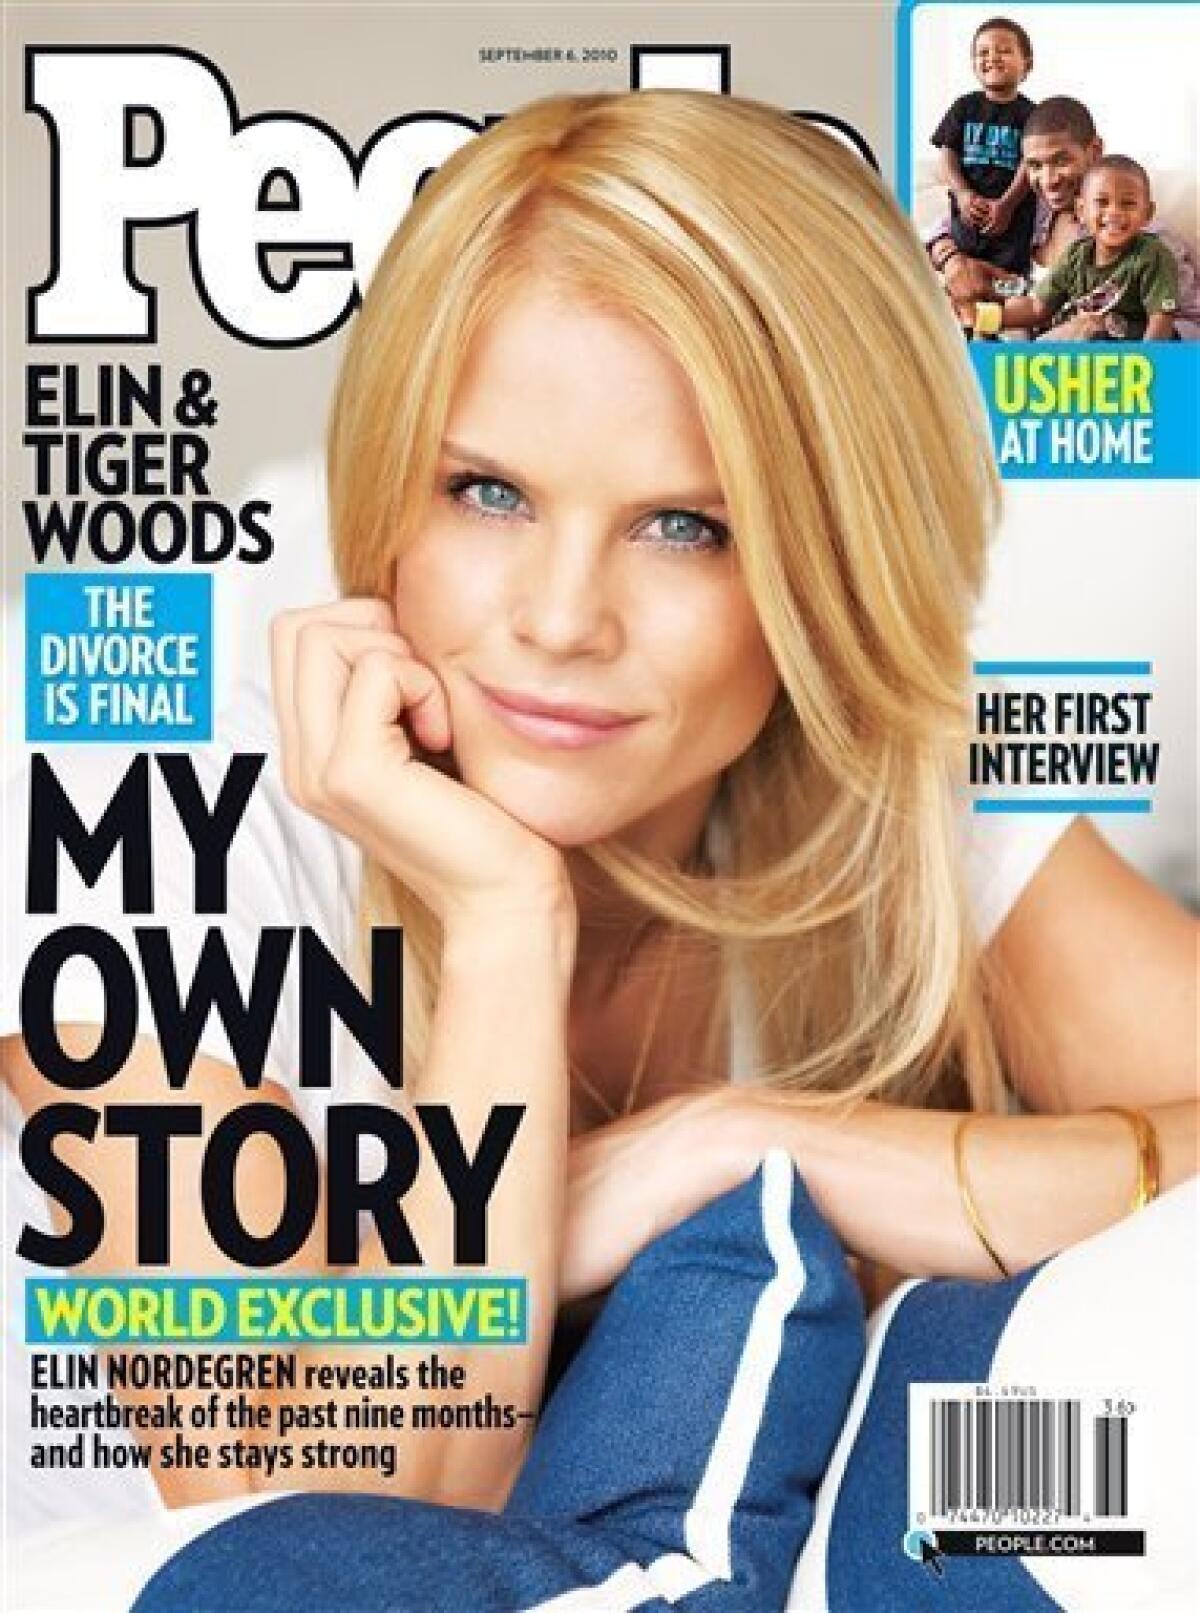 In this undated photo provided by People Magazine, Elin Nordegren is shown on the cover of People magazine's Sept. 6, 2010 issue. Tiger Woods' ex-wife said she has "been through hell" since her husband's infidelity surfaced but she never hit him, according to an interview released Wednesday. Nordegren told People magazine she and Woods tried for months to reconcile the relationship. In the end, a marriage "without trust and love" wasn't good for anyone, she said. (AP Photo/People Magazine) MANDATORY CREDIT, NO SALES